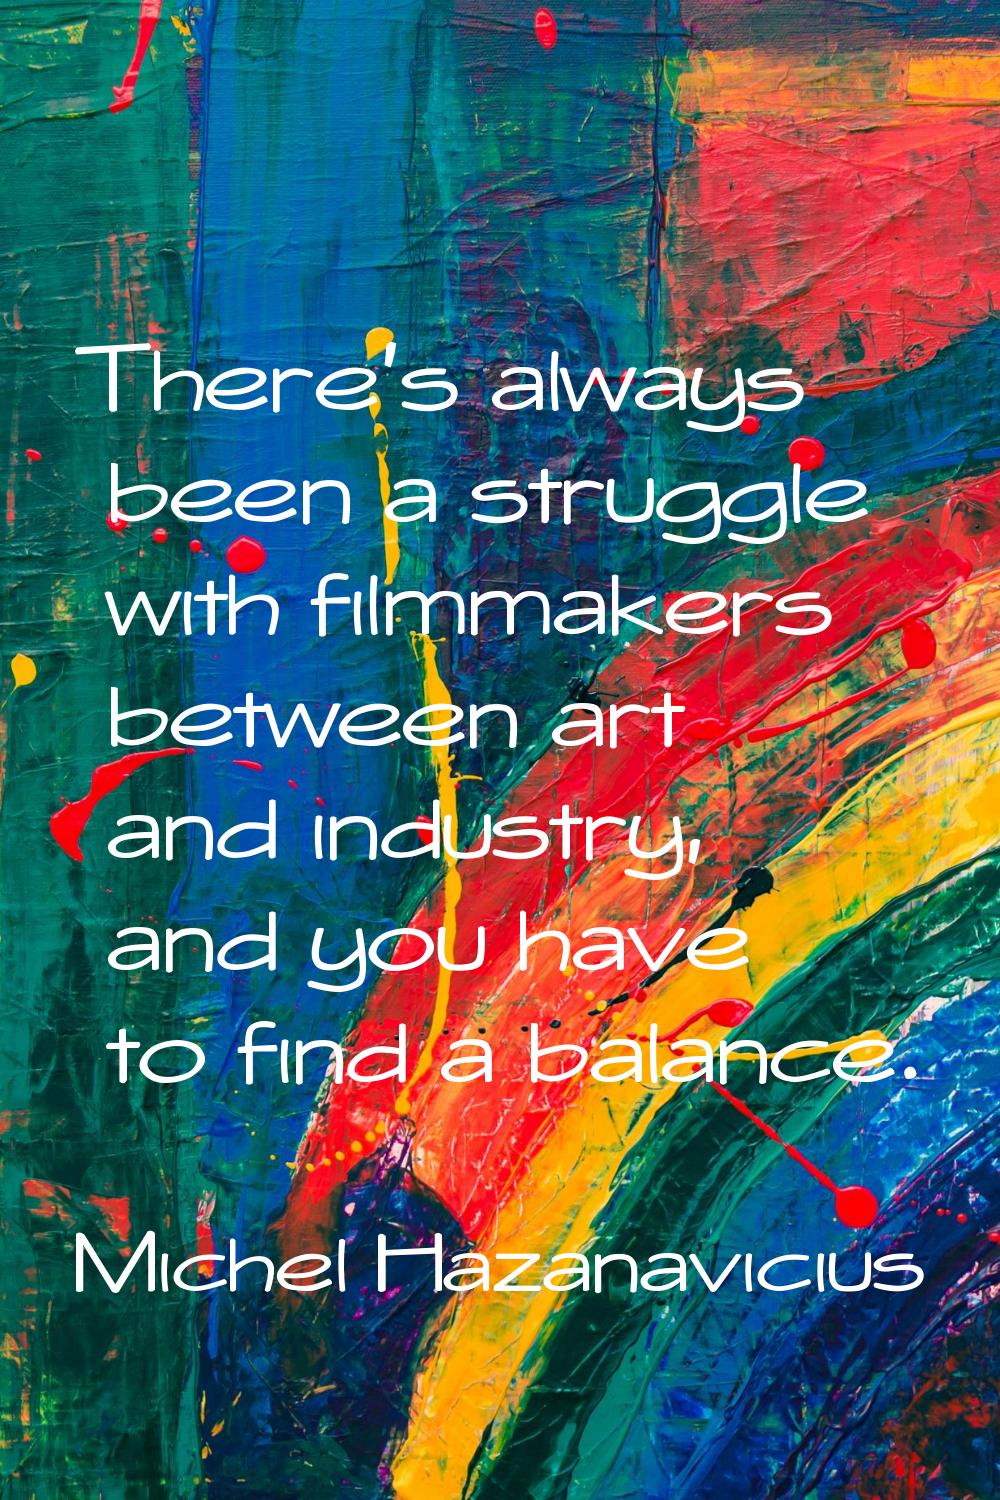 There's always been a struggle with filmmakers between art and industry, and you have to find a bal